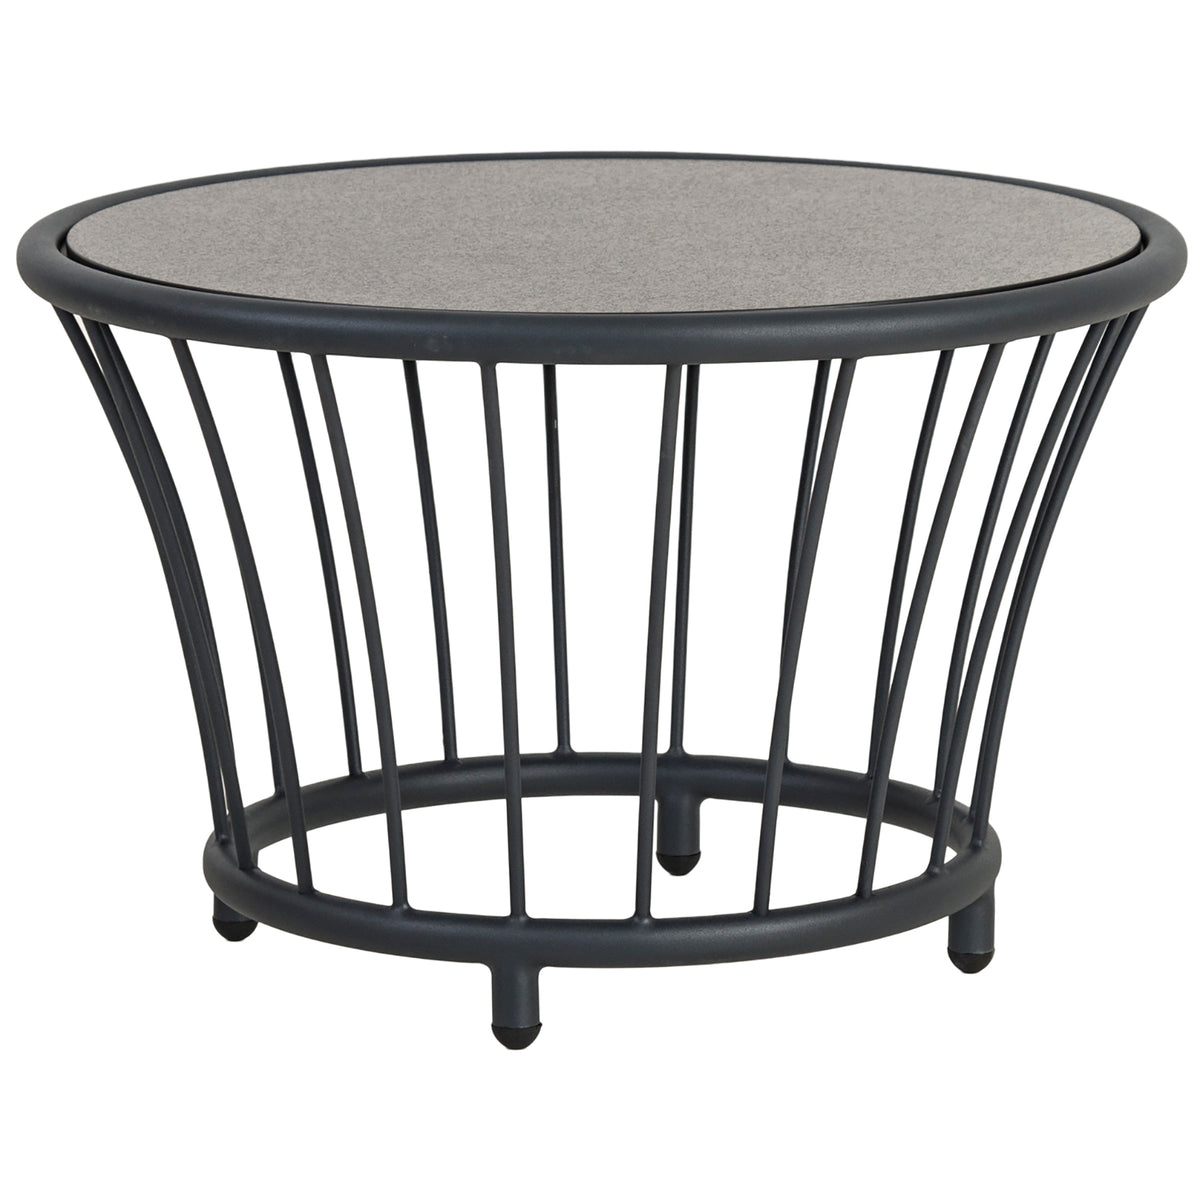 Alexander Rose Cordial Grey Round Coffee Table with Pebble Laminate Top